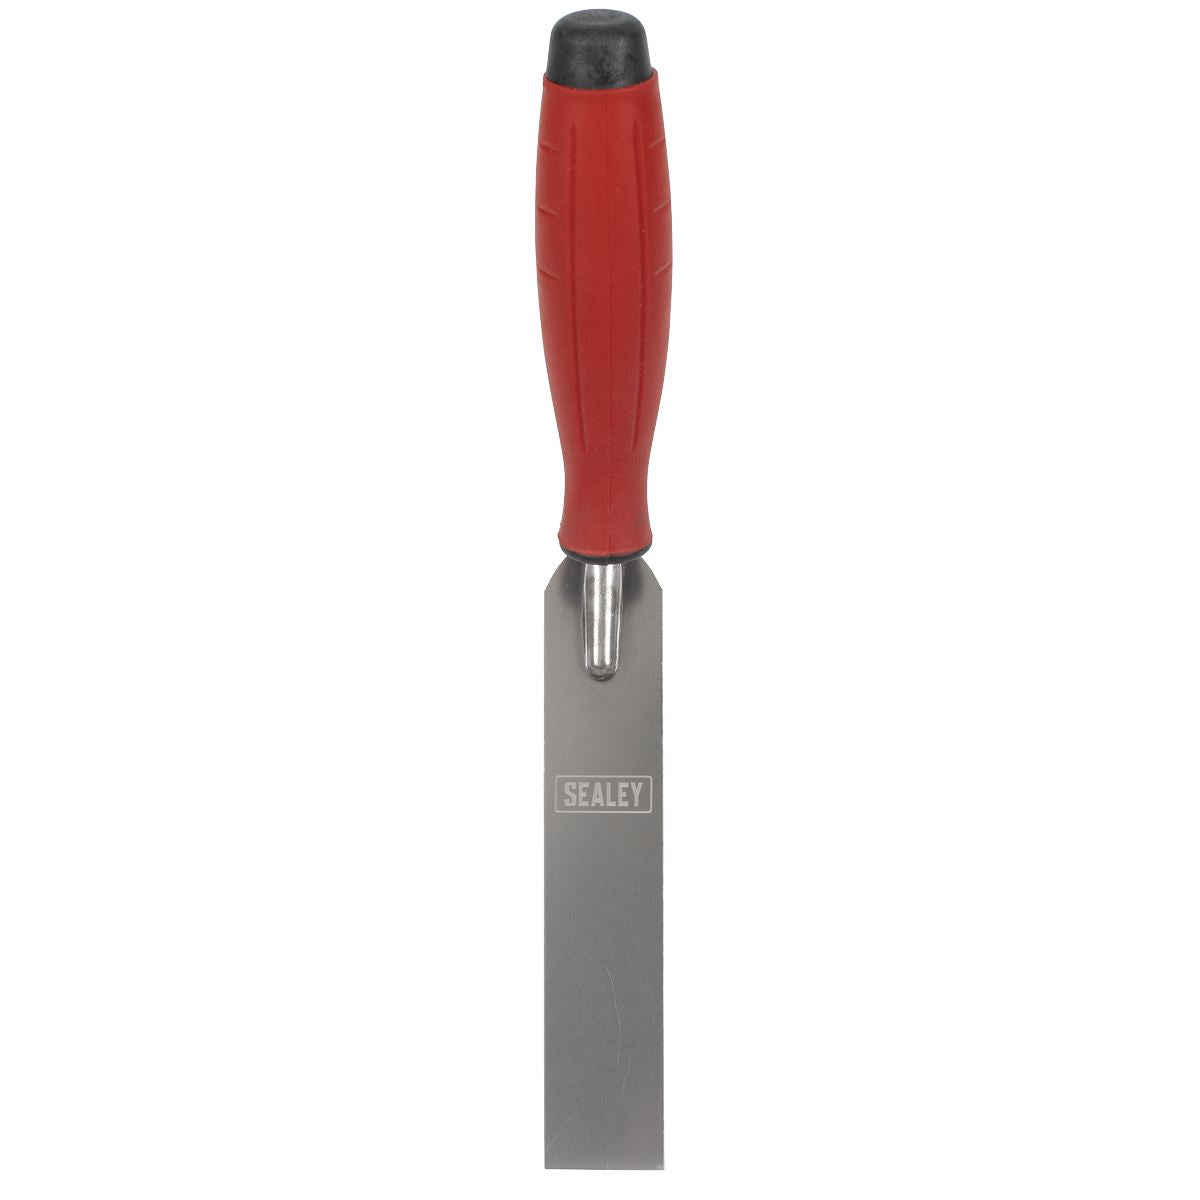 Sealey Stainless Steel Finishing Trowel - Rubber Handle - 30 x 160mm